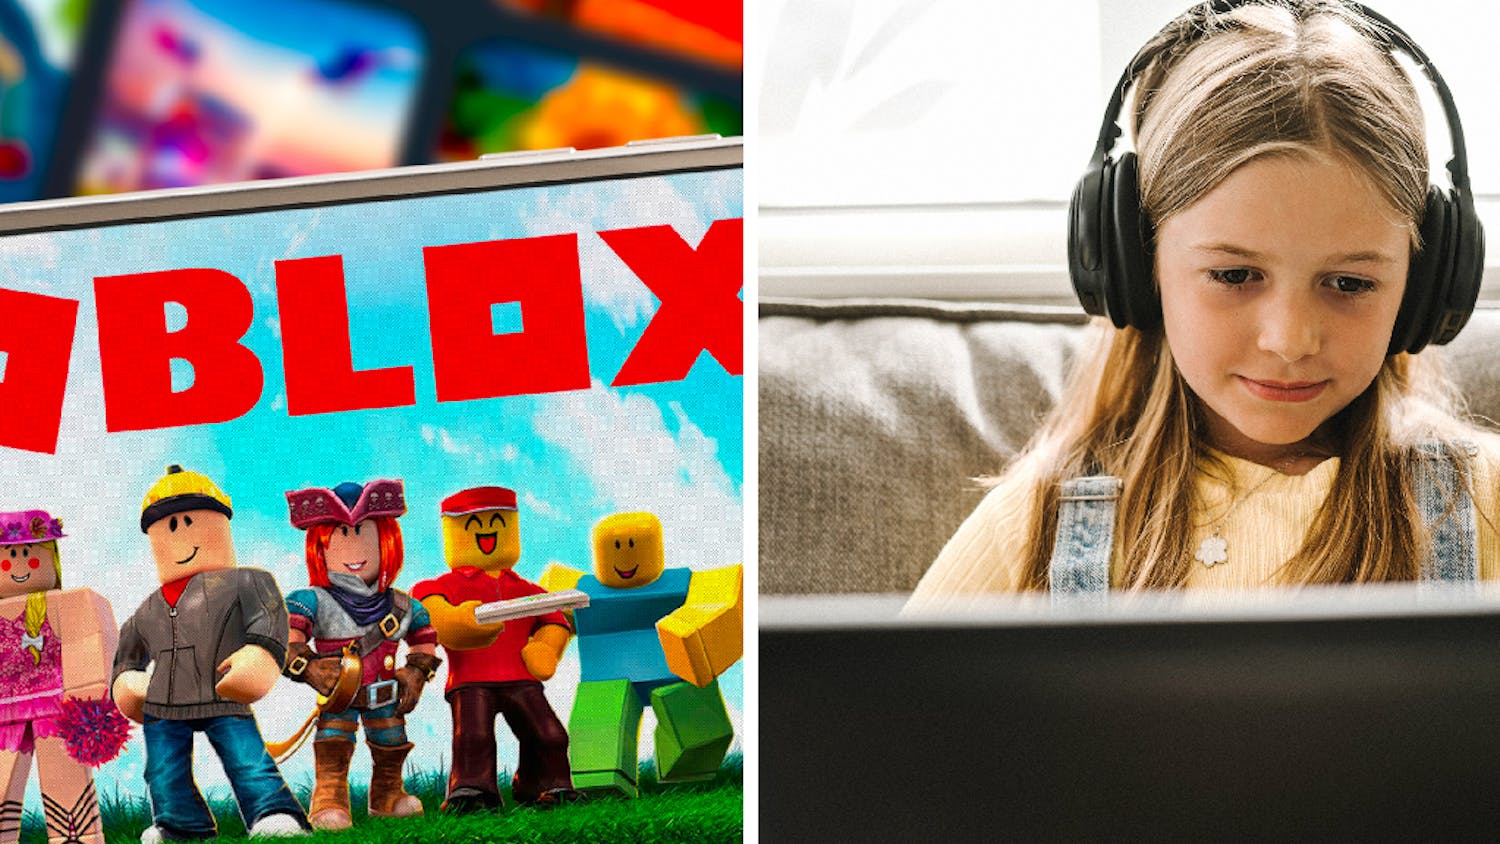 Extremists creep into Roblox, an online game popular with children